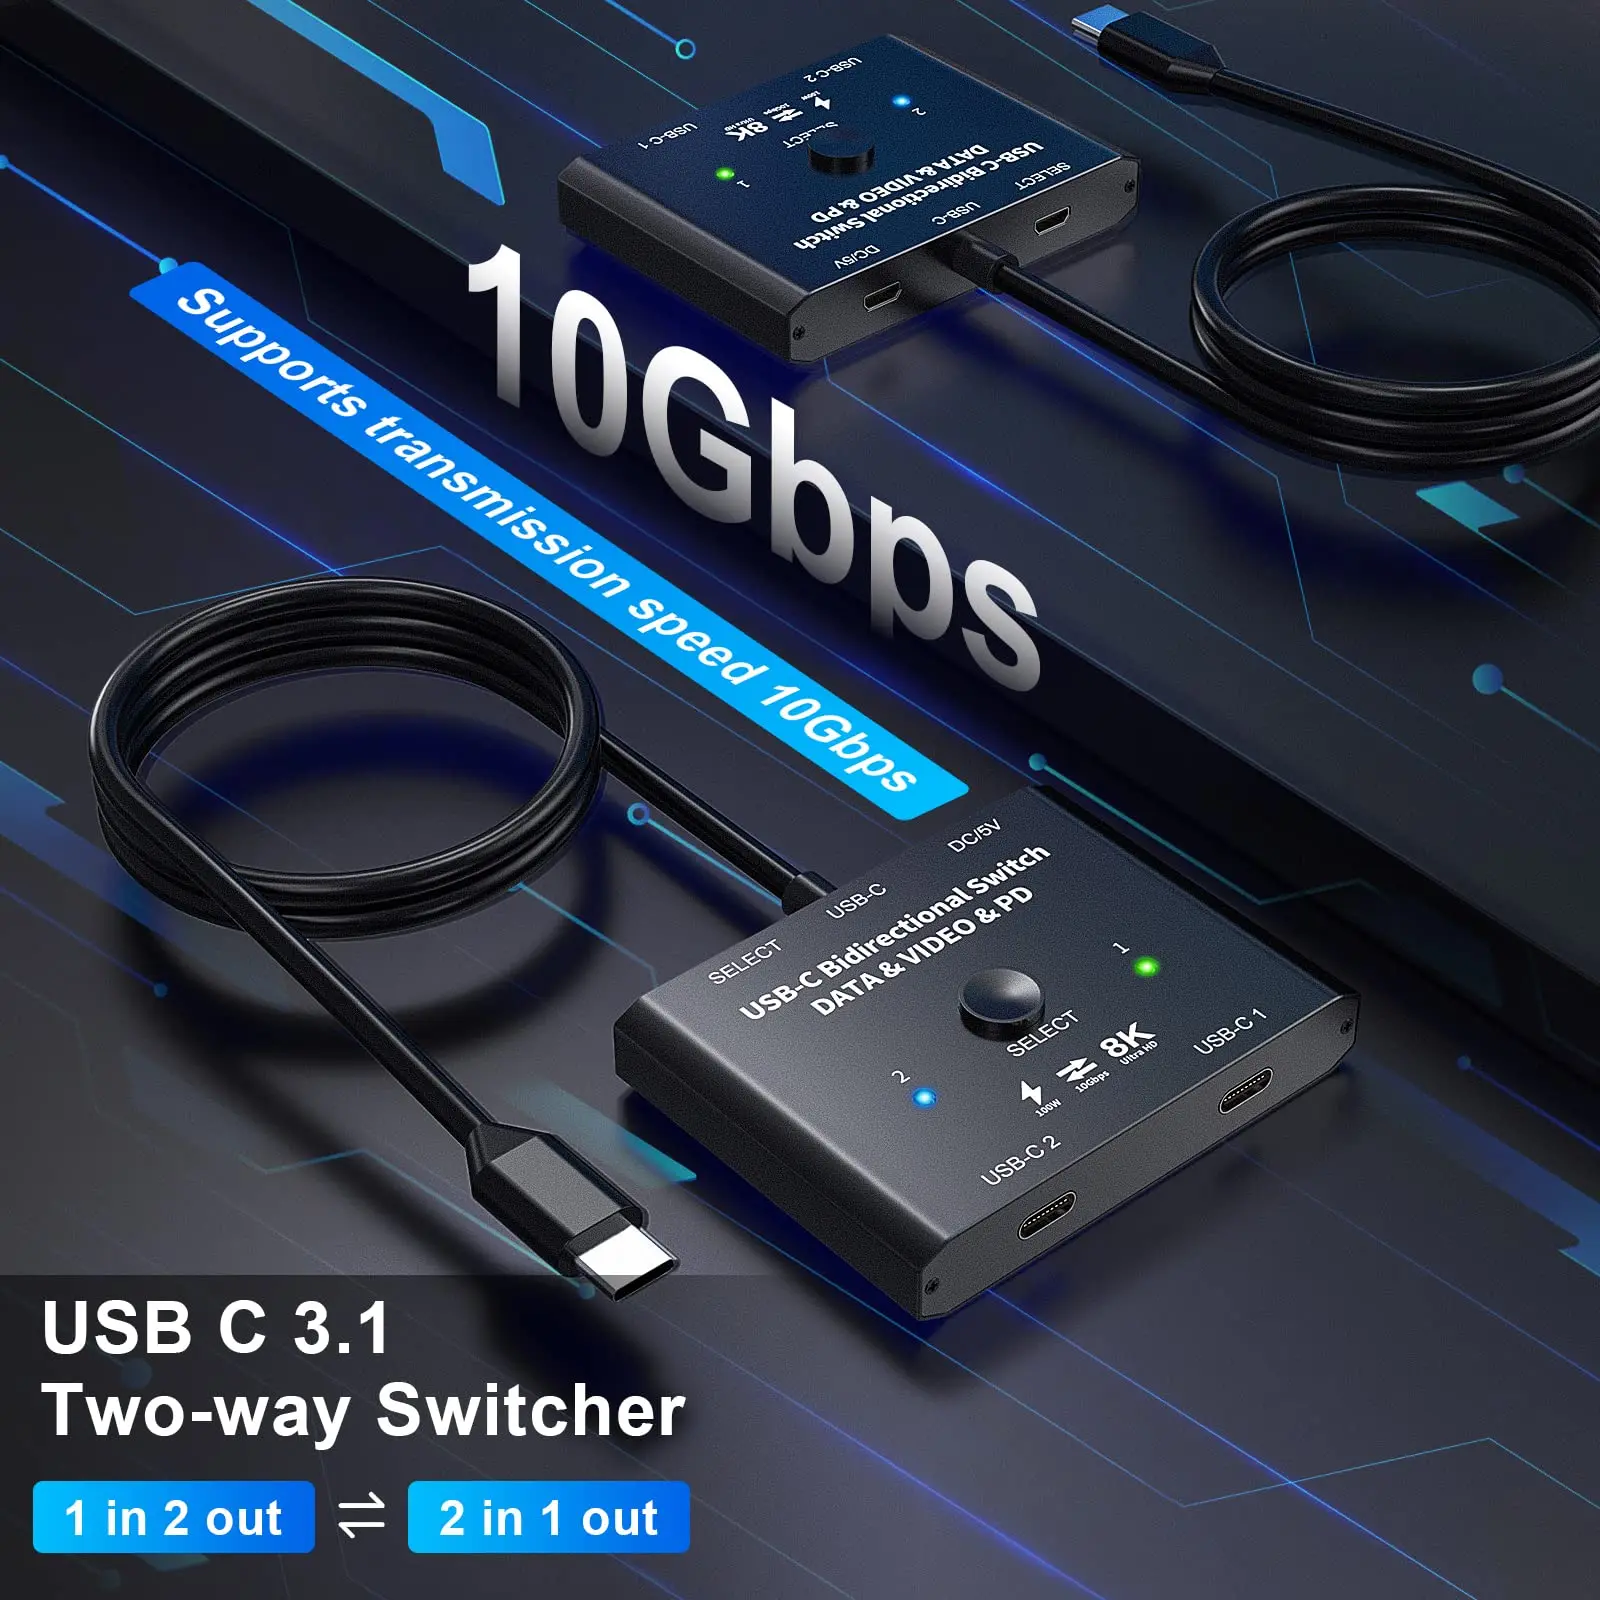 2 in 1 Out or 1 in 2 Out USB C Switch, Type-C Bidirectional Switcher Used for 2 Computers with C Port, Supports 4K@120Hz 8K@60Hz